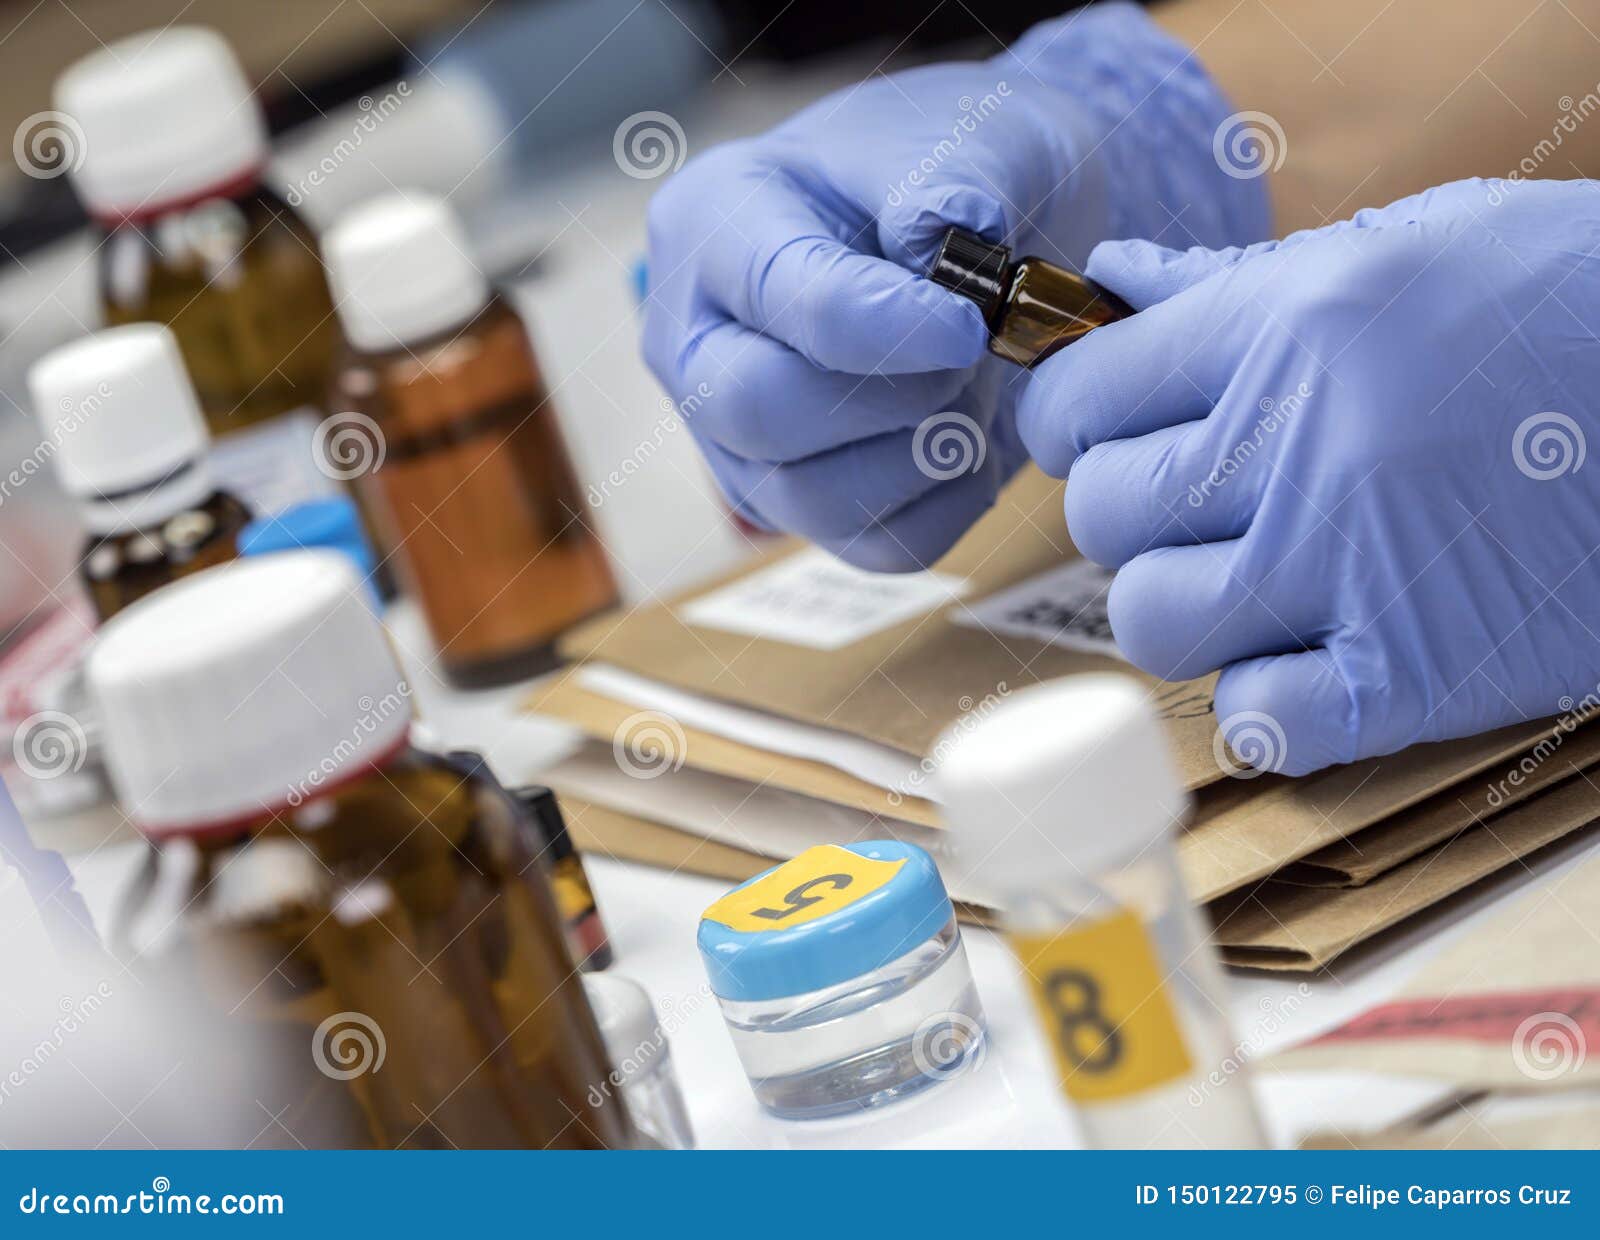 scientific police takes blood sample at laboratorio forensic equipment